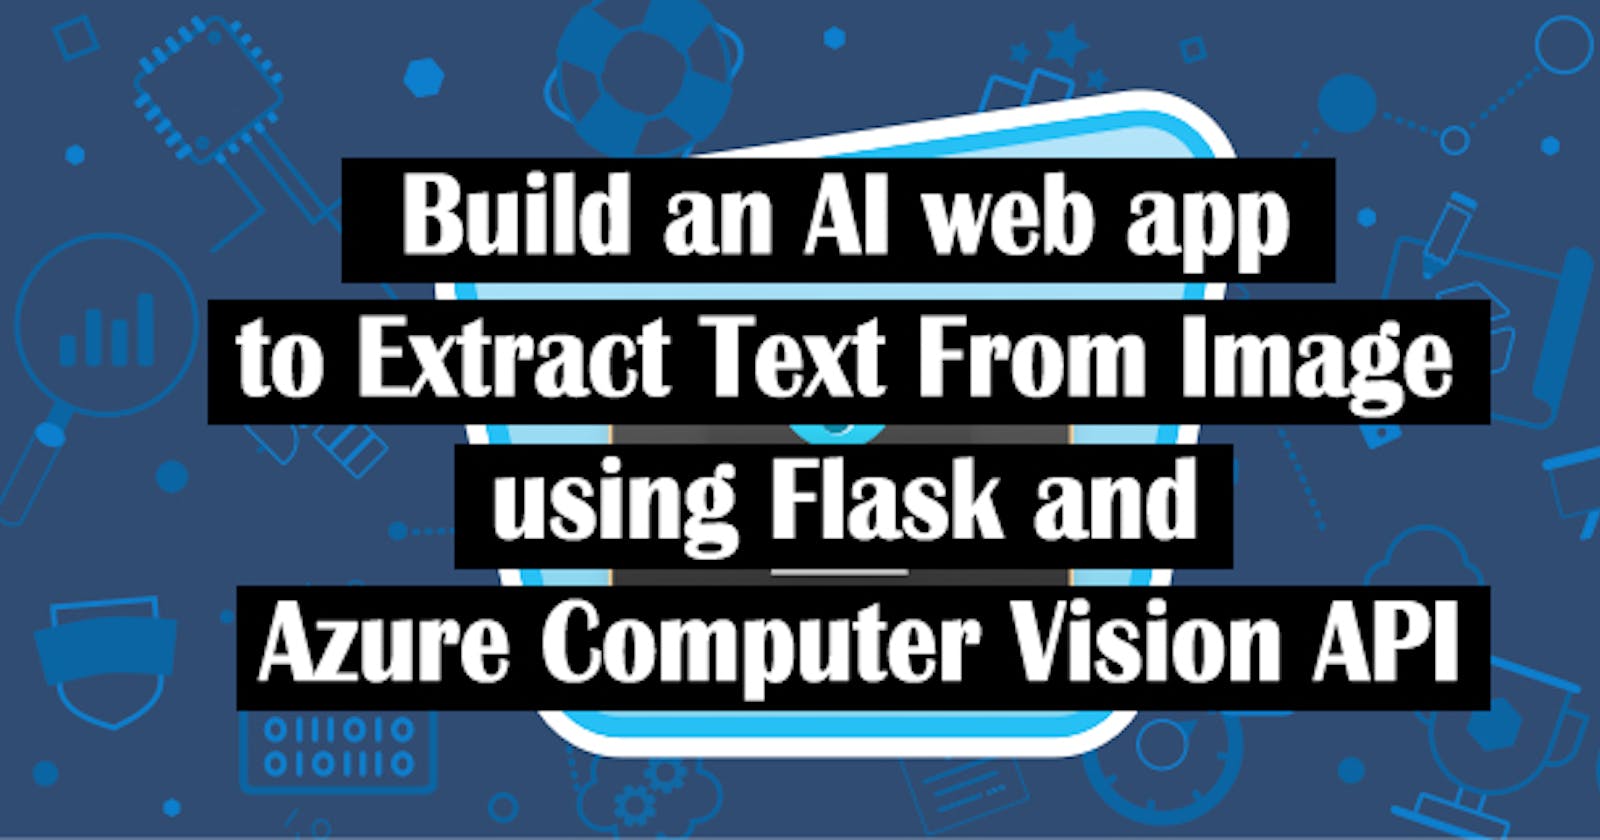 Build an AI web app to Extract Text From Images using Flask and Azure Computer Vision API